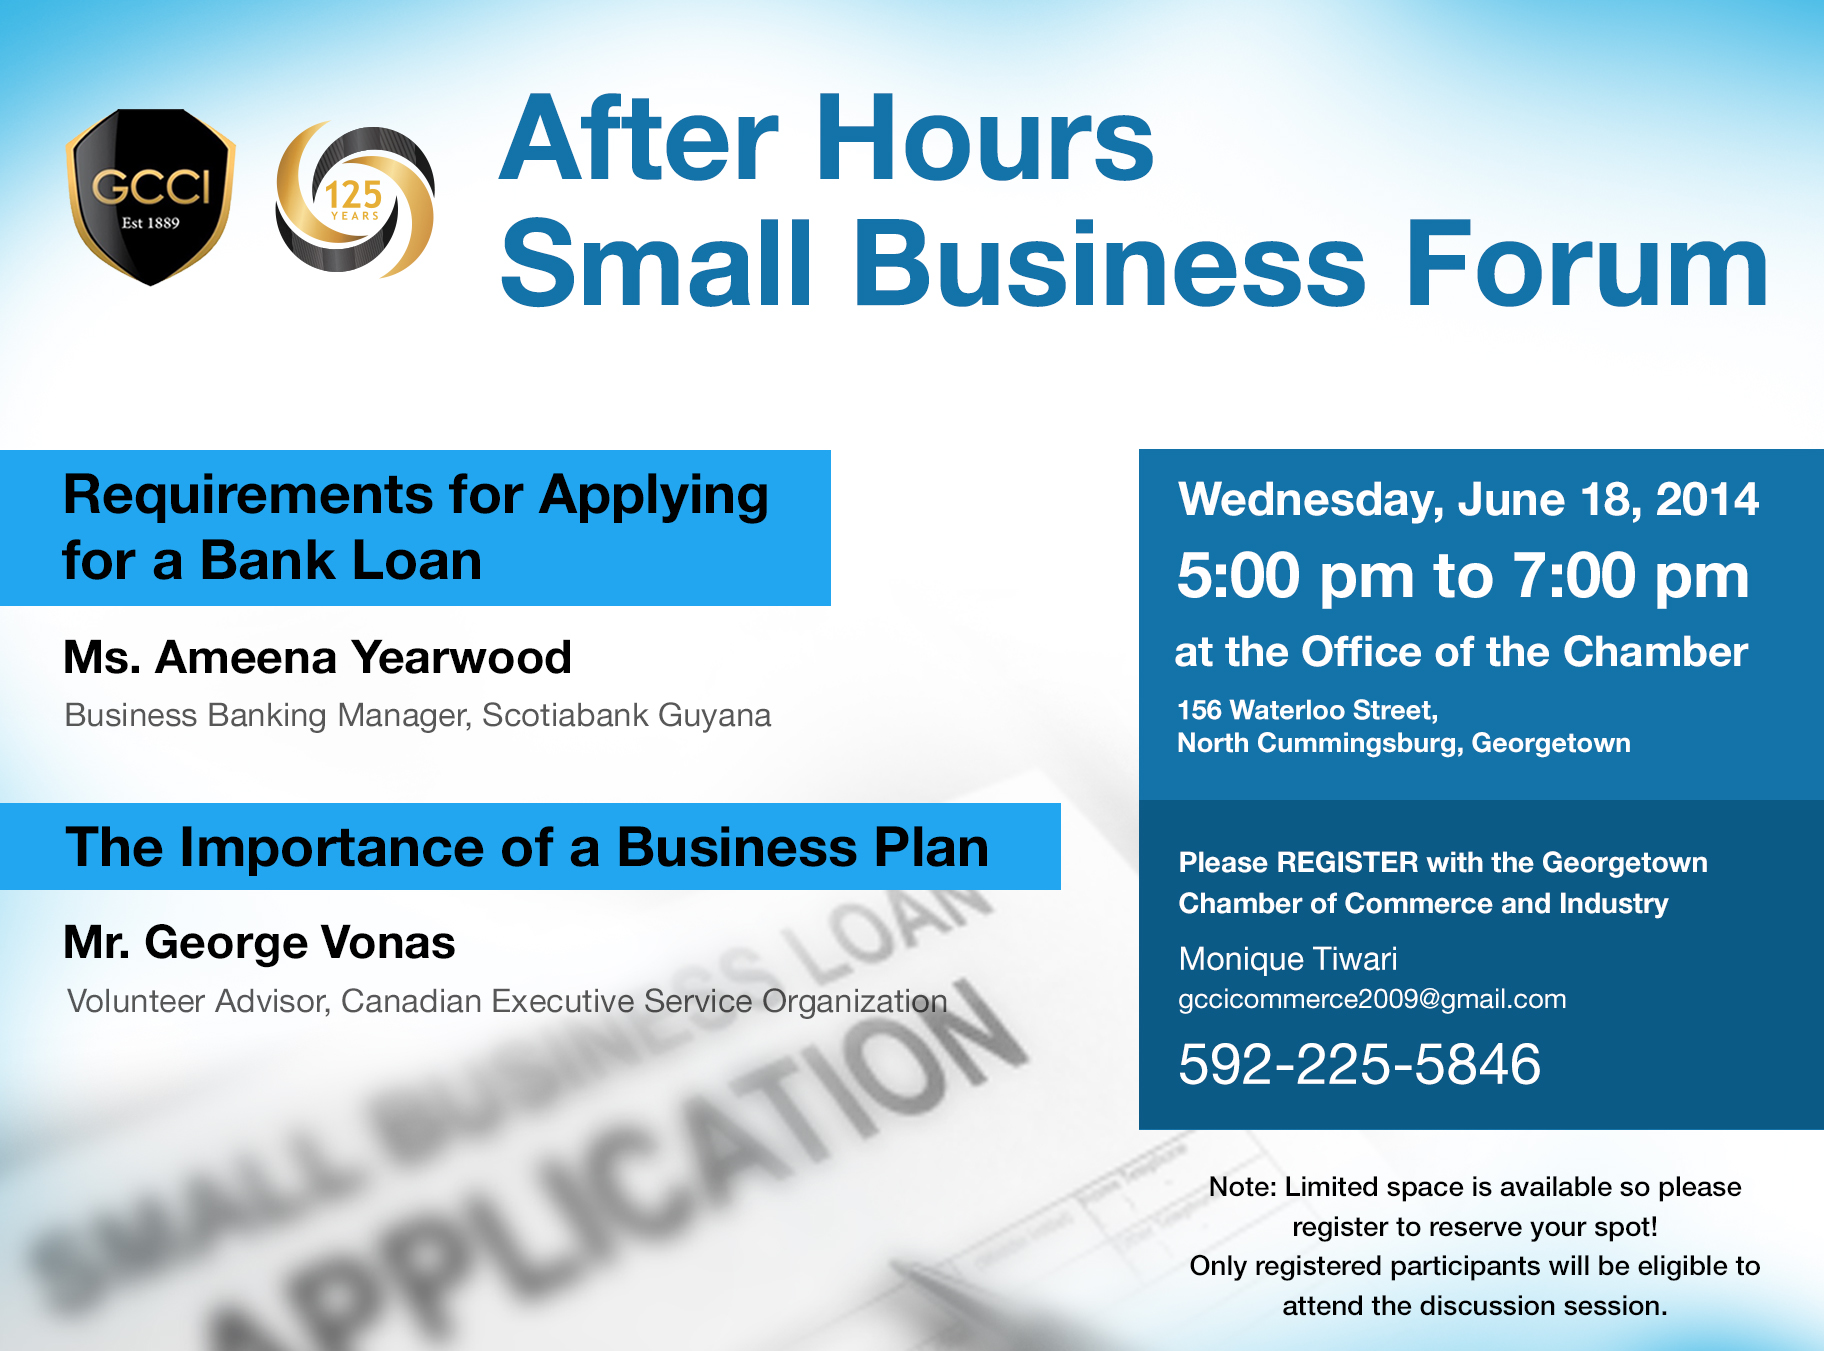 After Hours Small Business Forum – June 18, 2014 at 5:00 p.m. at the GCCI